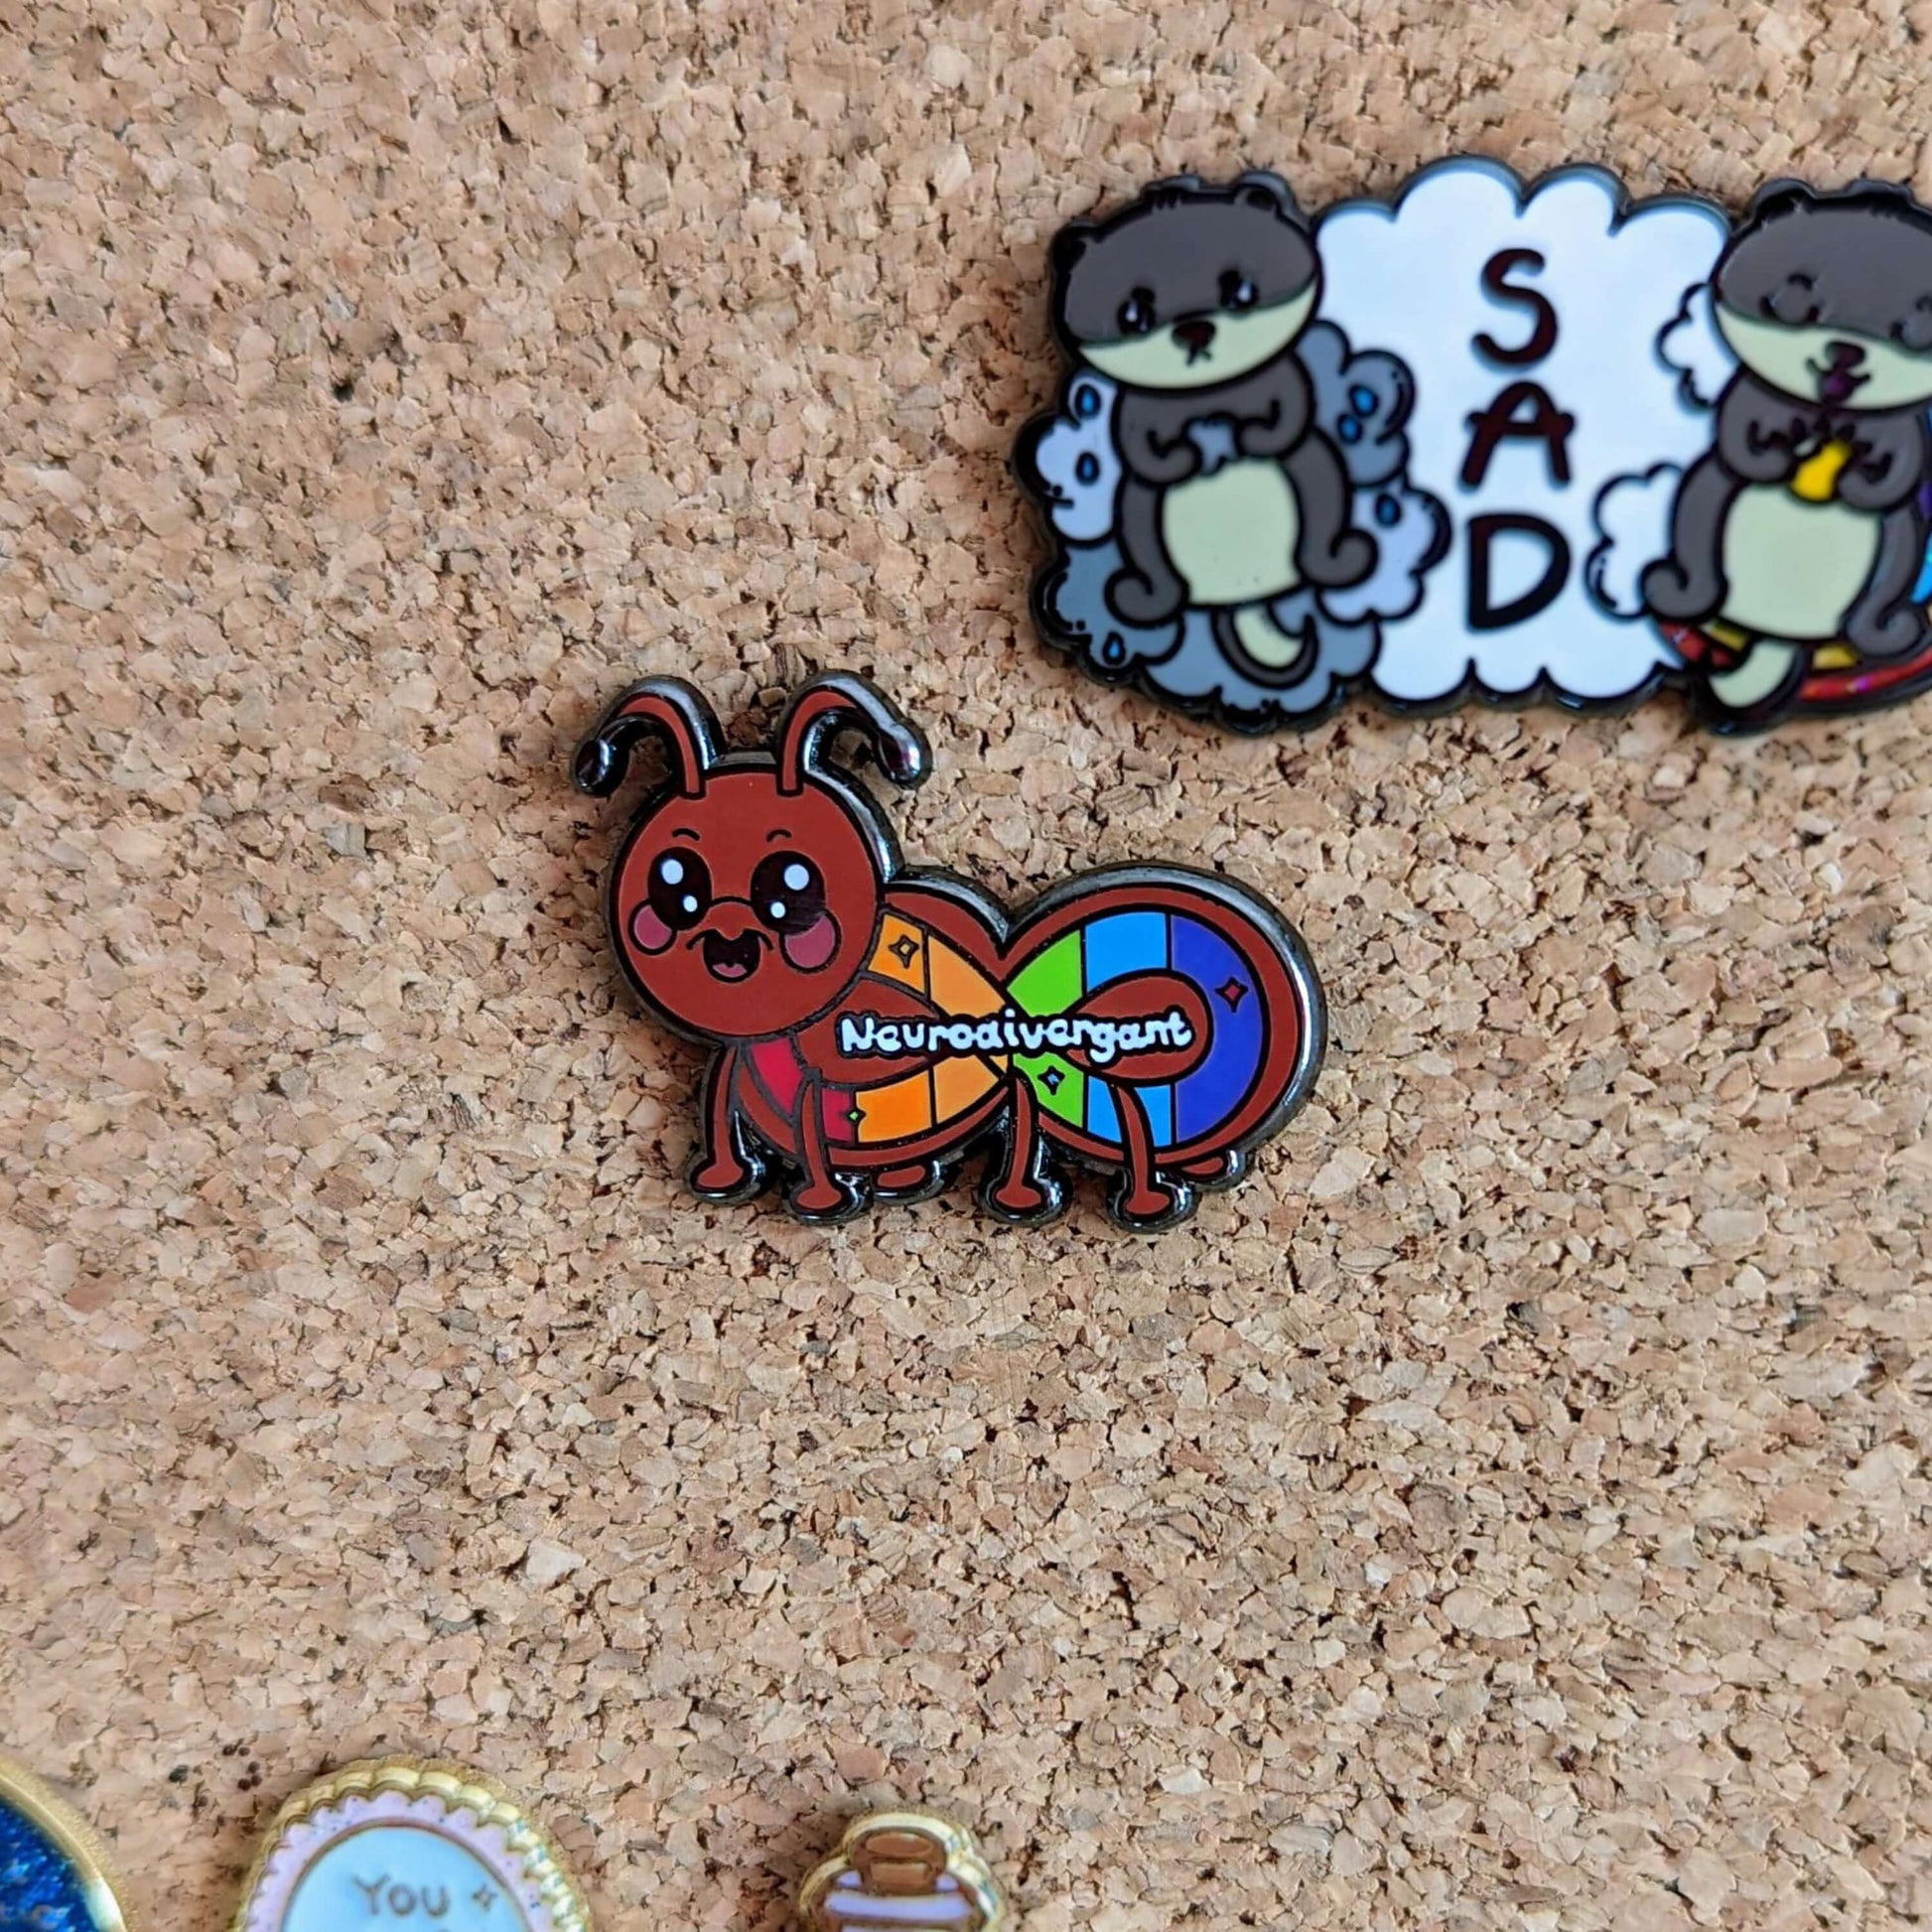 The Neurodivergant Ant Enamel Pin - Neurodivergent pinned on a cork pin board. The brown ant shape enamel pin is smiling with a rainbow infinity symbol and white text reading 'neurodivergant' with sparkles across its body. The hand drawn design is raising awareness for neurodiversity.